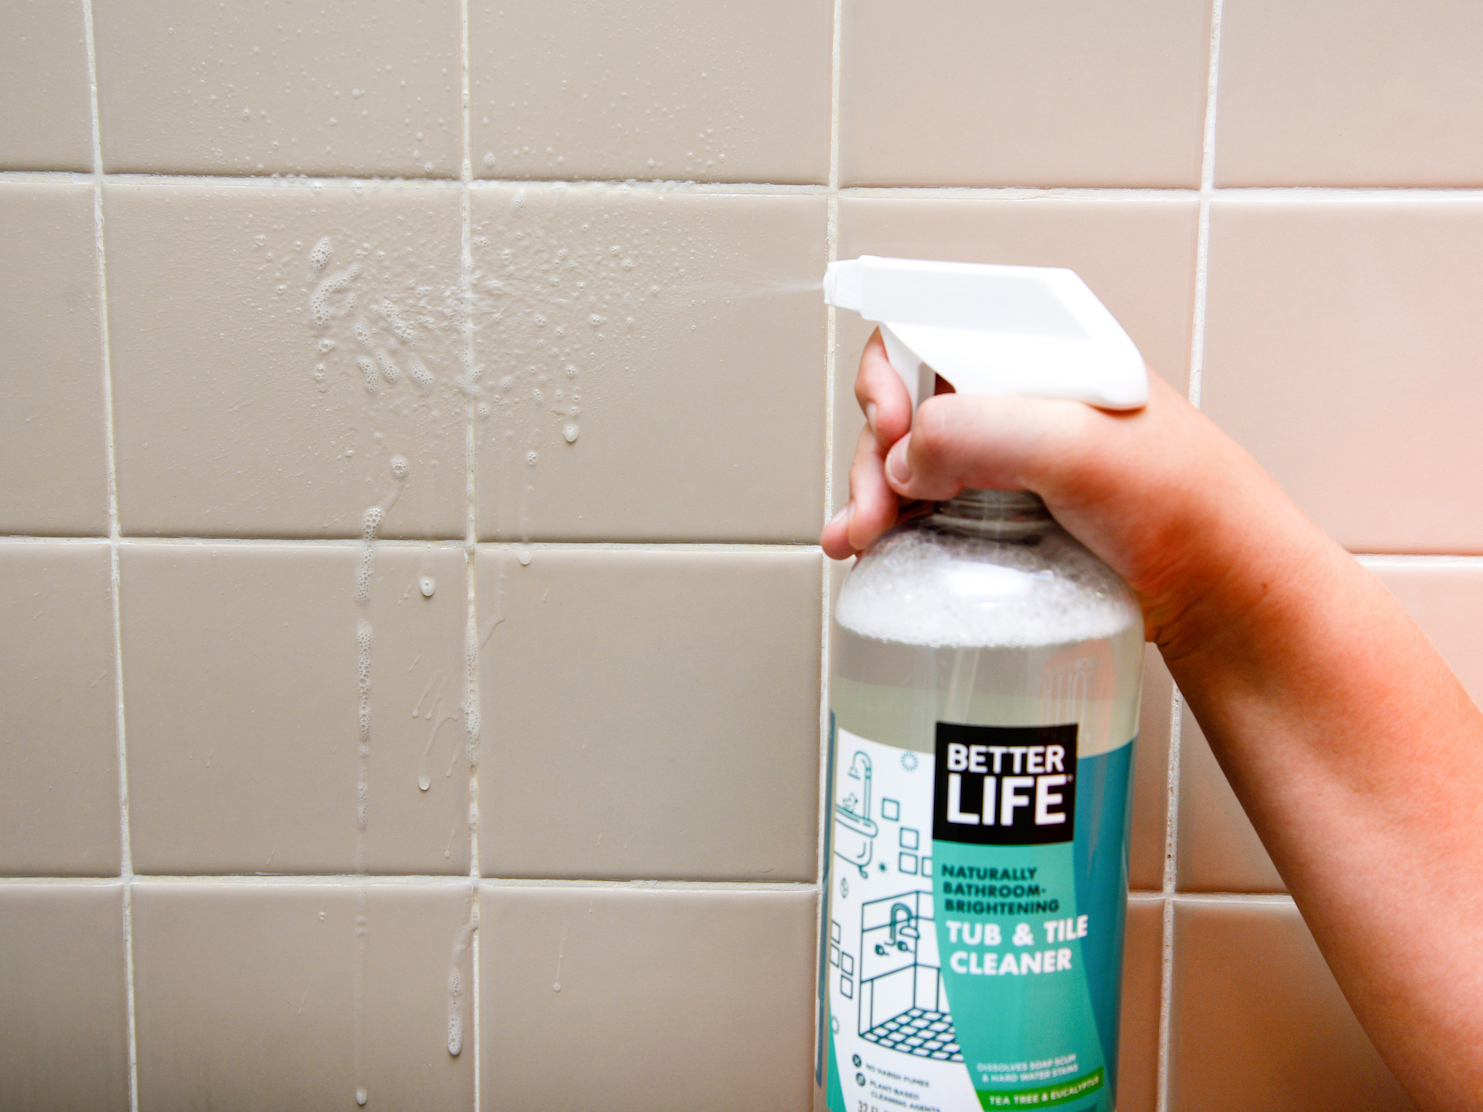 A person spraying the Better Life tub and tile cleaner on shower tile.